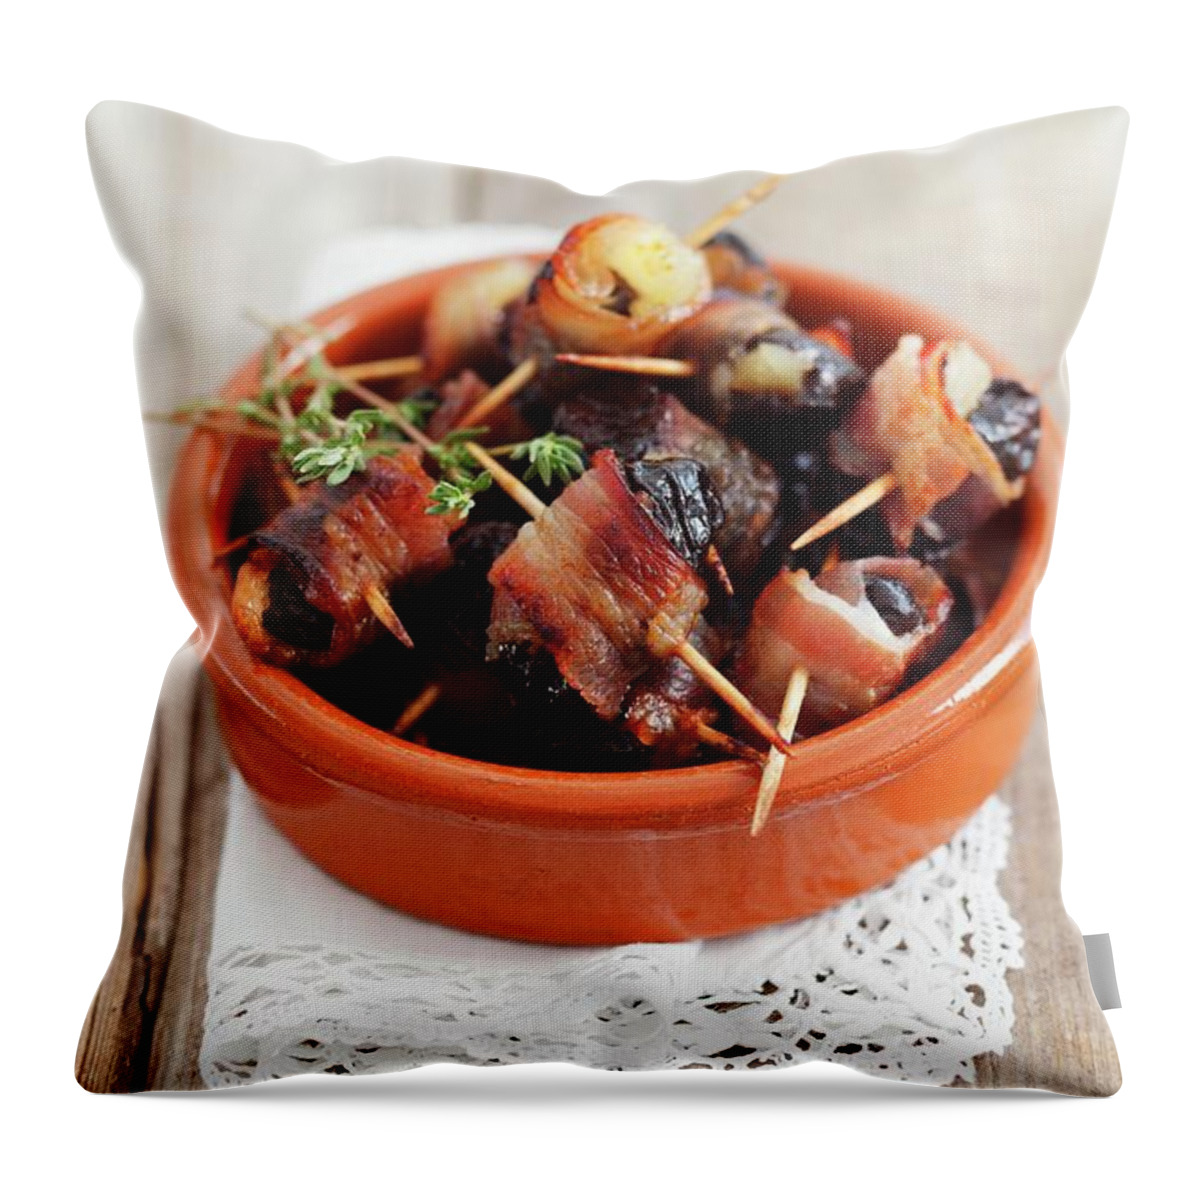 Ip_11225587 Throw Pillow featuring the photograph Prunes Filled With Apple Pure And Wrapped In Pancetta by Rua Castilho